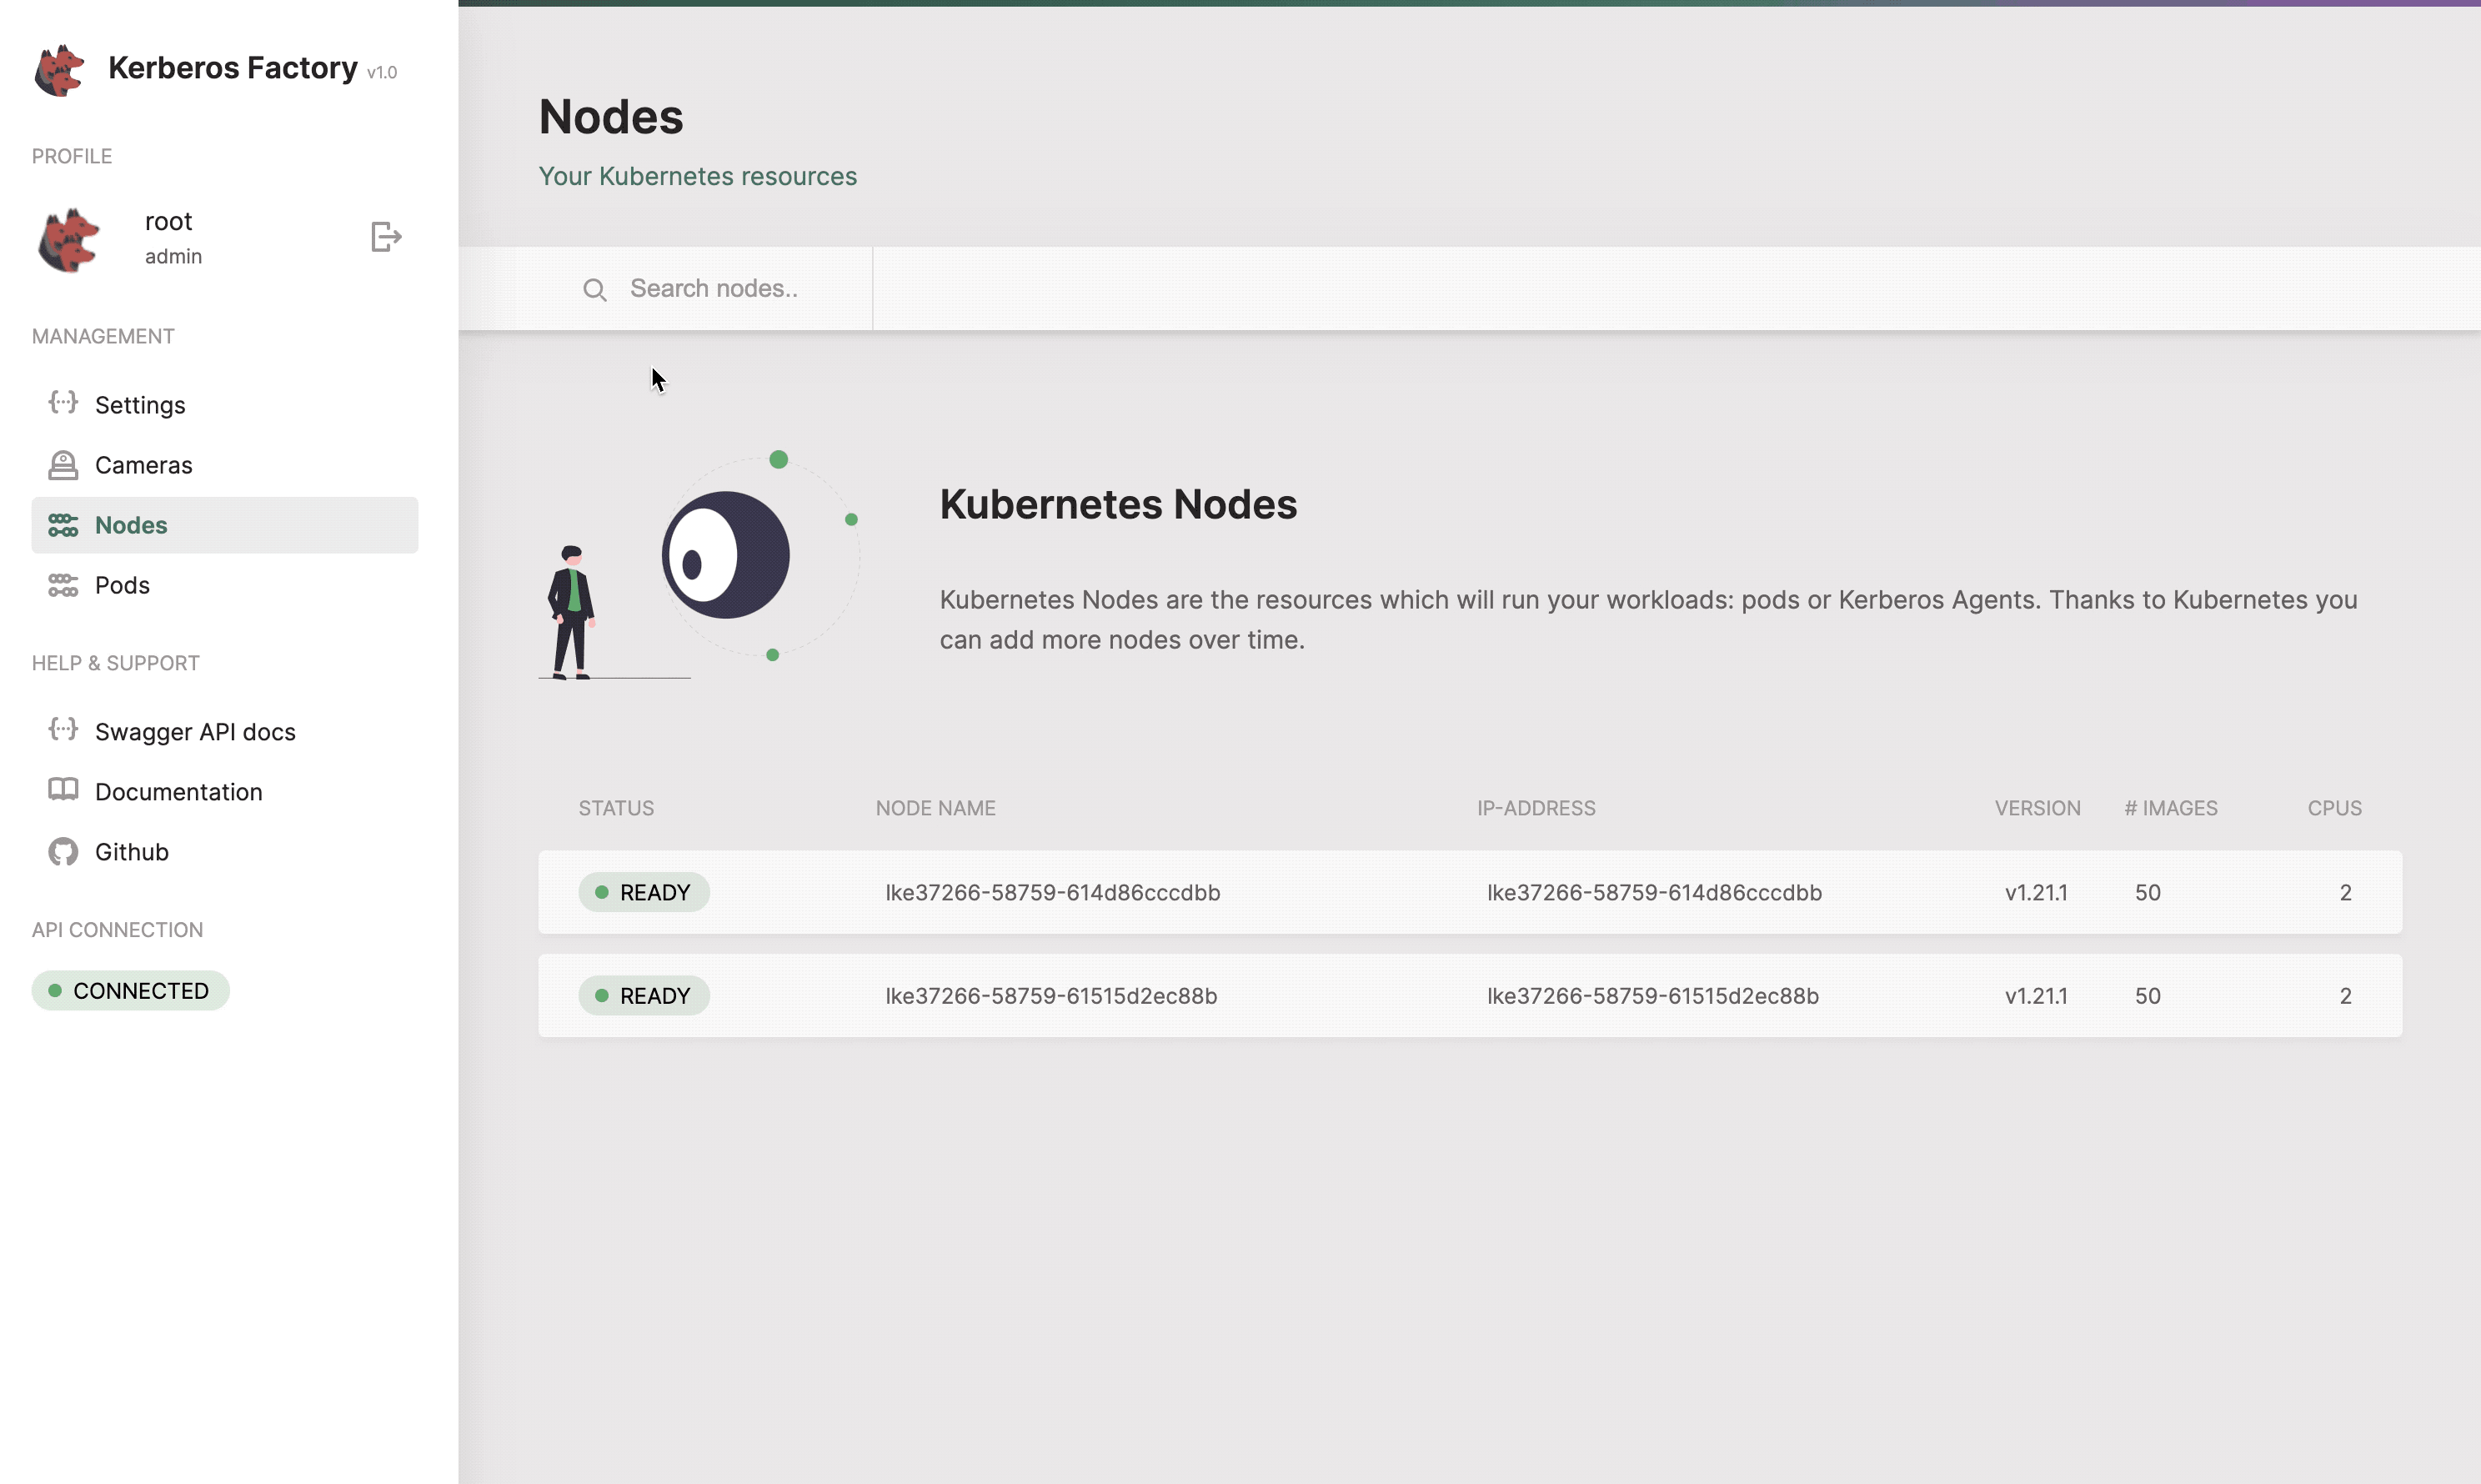 Get an entire list of nodes which are connected to your Kubernetes cluster.